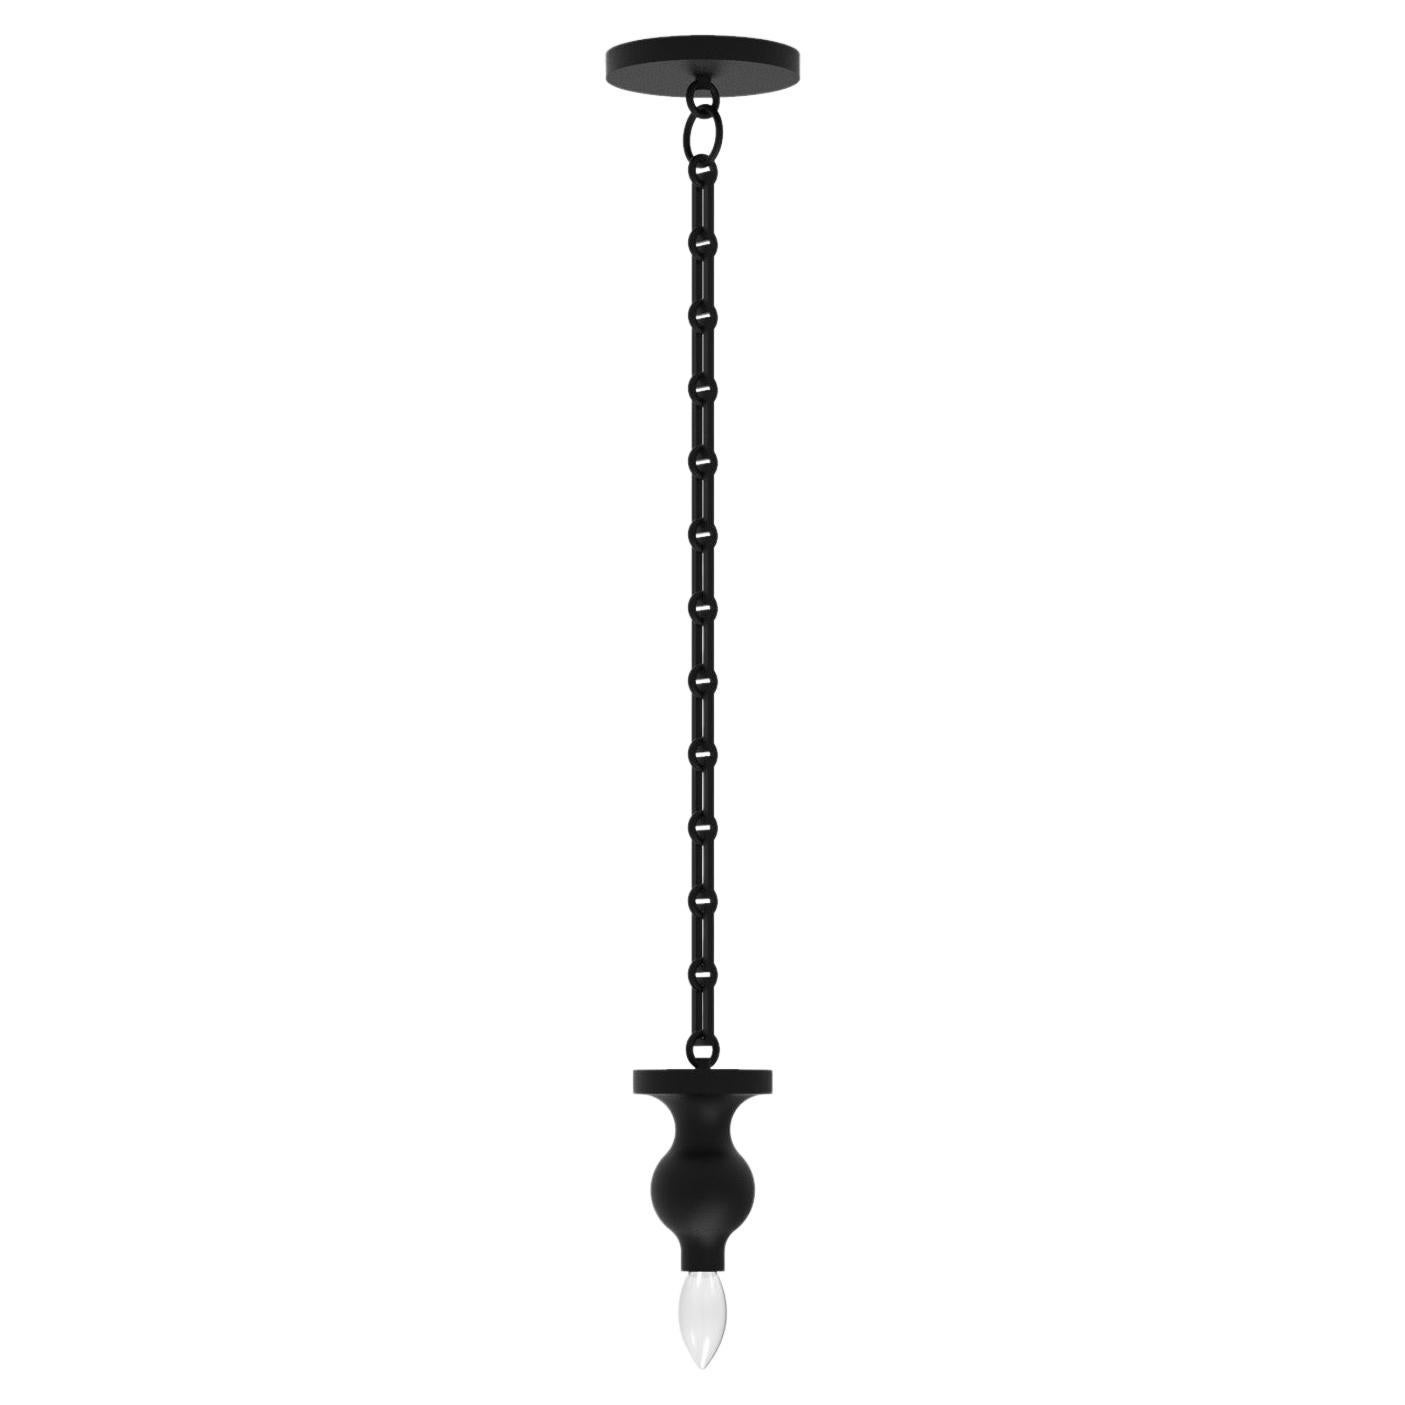 Orphan Work 300 Pendant BLK
Shown in blackened brass
Available in brushed brass and blackened brass
Measures: 6 1/2” Height (not including bulb)
height and width to order*
canopy 6